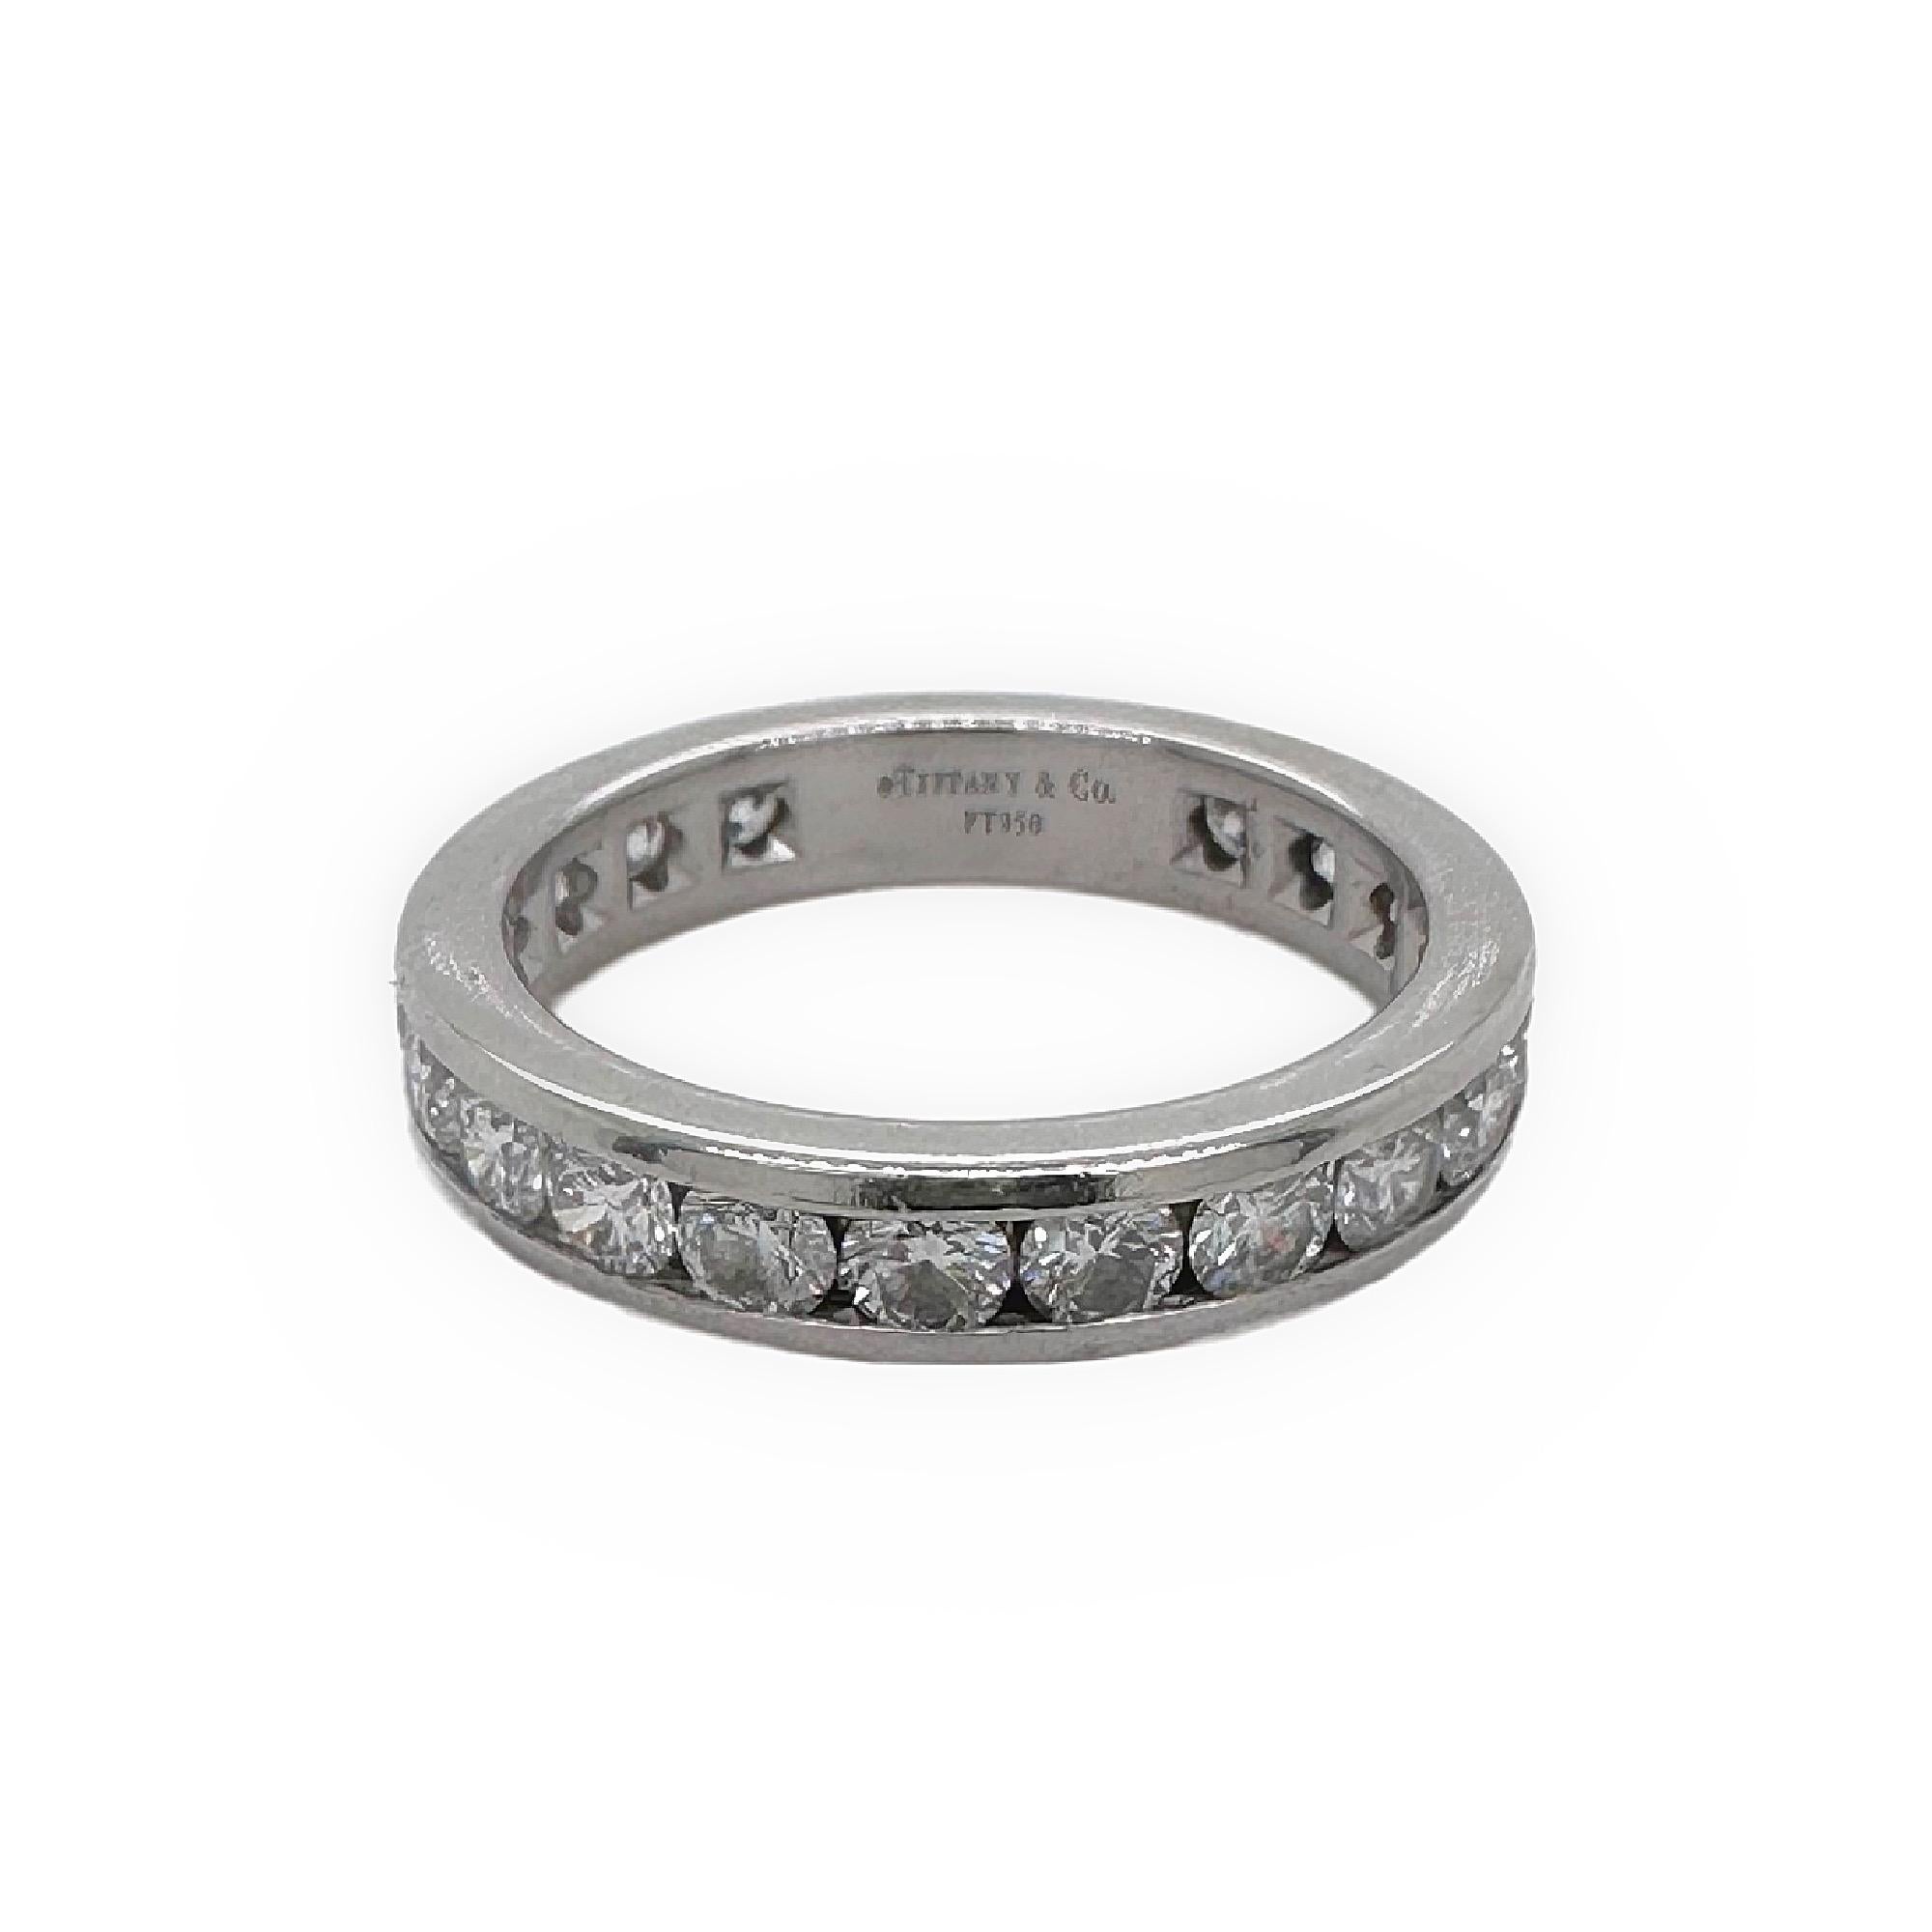 Tiffany & Co. Full Circle Diamond Channel Set Eternity Band 1.95tcw Plat In Excellent Condition For Sale In San Diego, CA